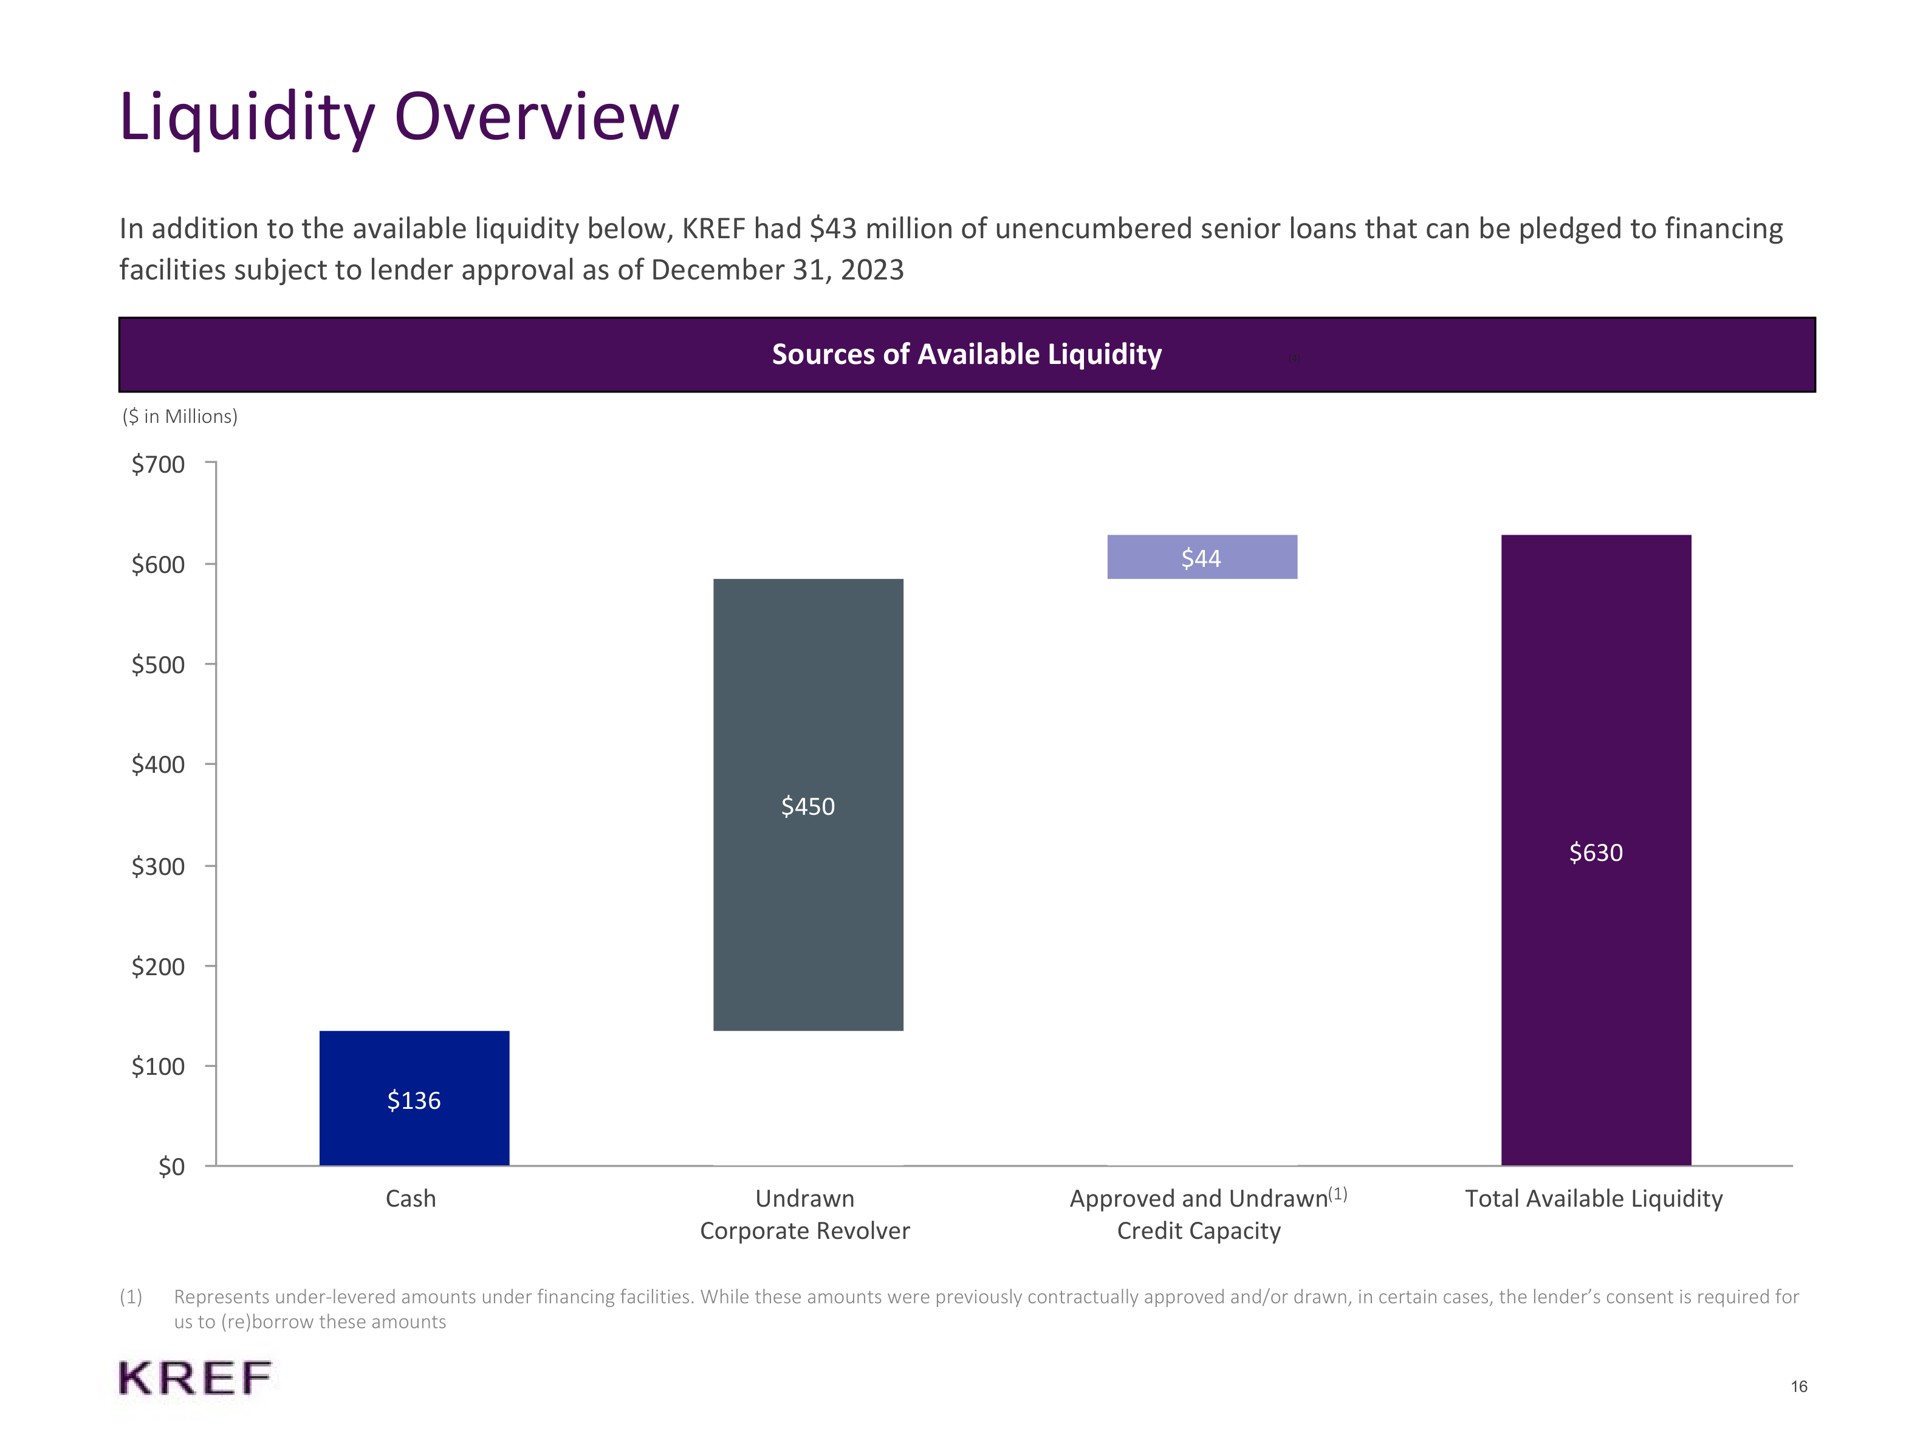 liquidity overview in addition to the available liquidity below had million of unencumbered senior loans that can be pledged to financing facilities subject to lender approval as of sources of available liquidity so | KKR Real Estate Finance Trust